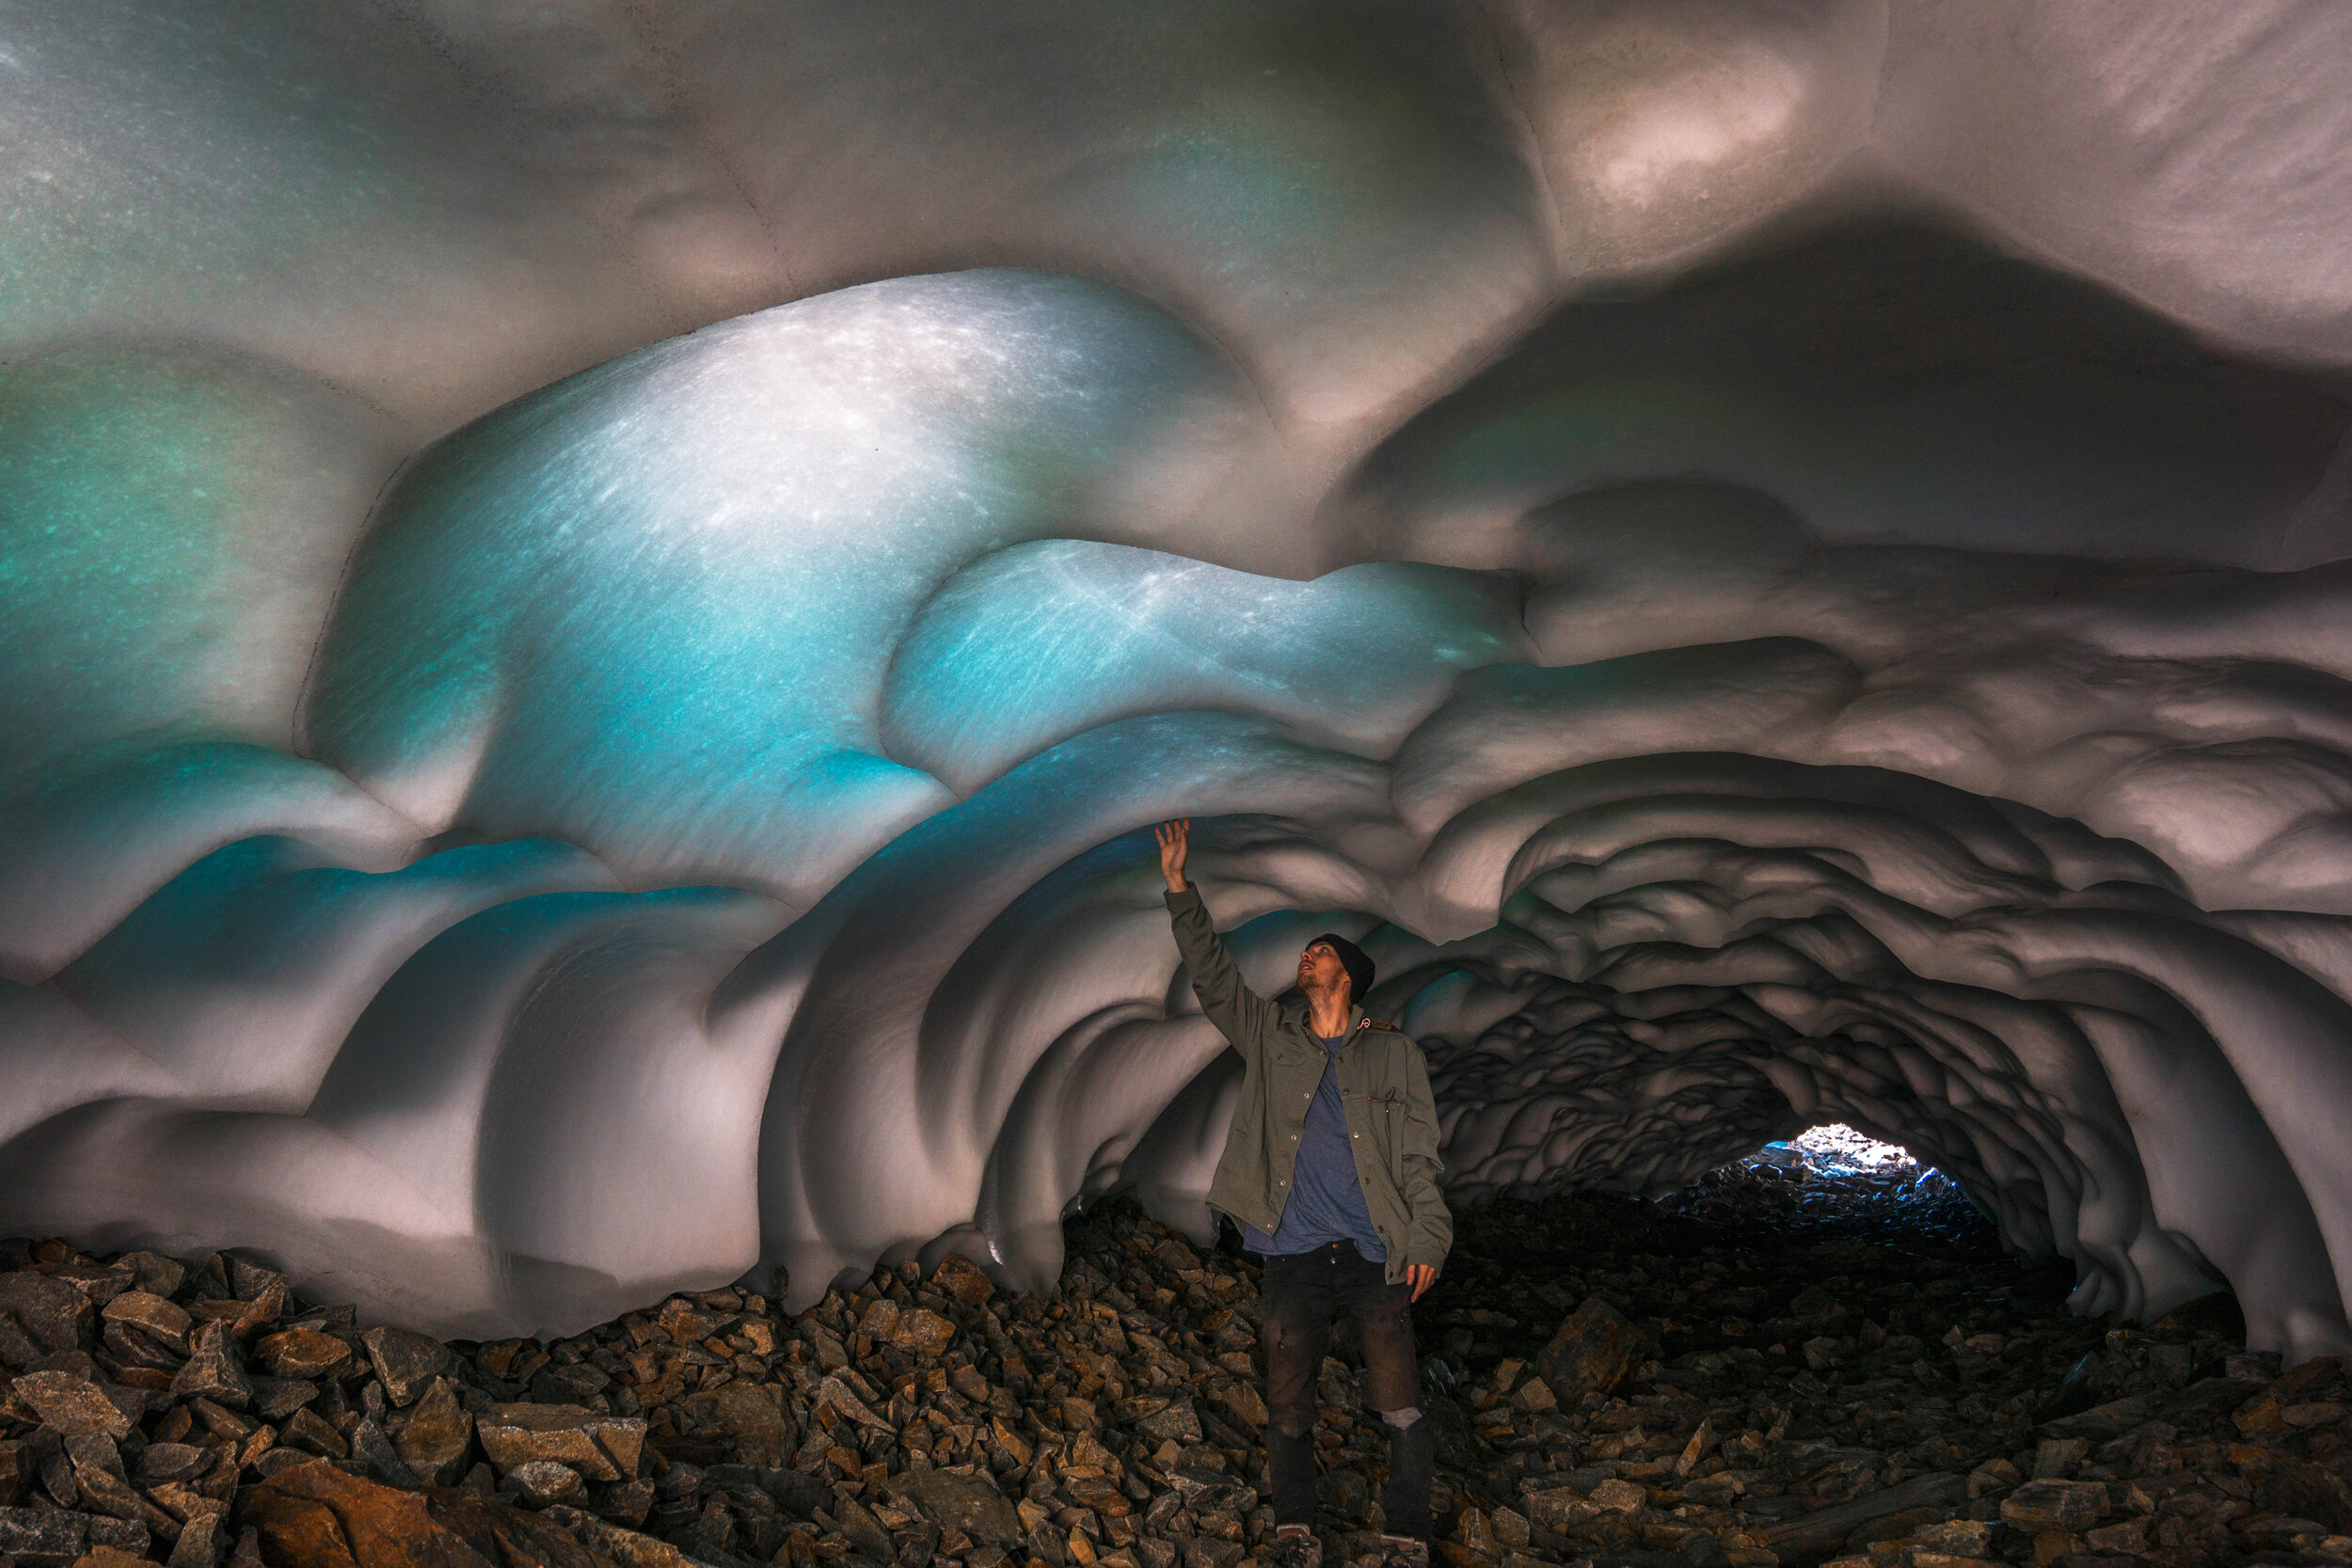 We never knew ice caves even formed in the Sierra Nevada Mountains. Its honestly impossible to describe how rad it was.